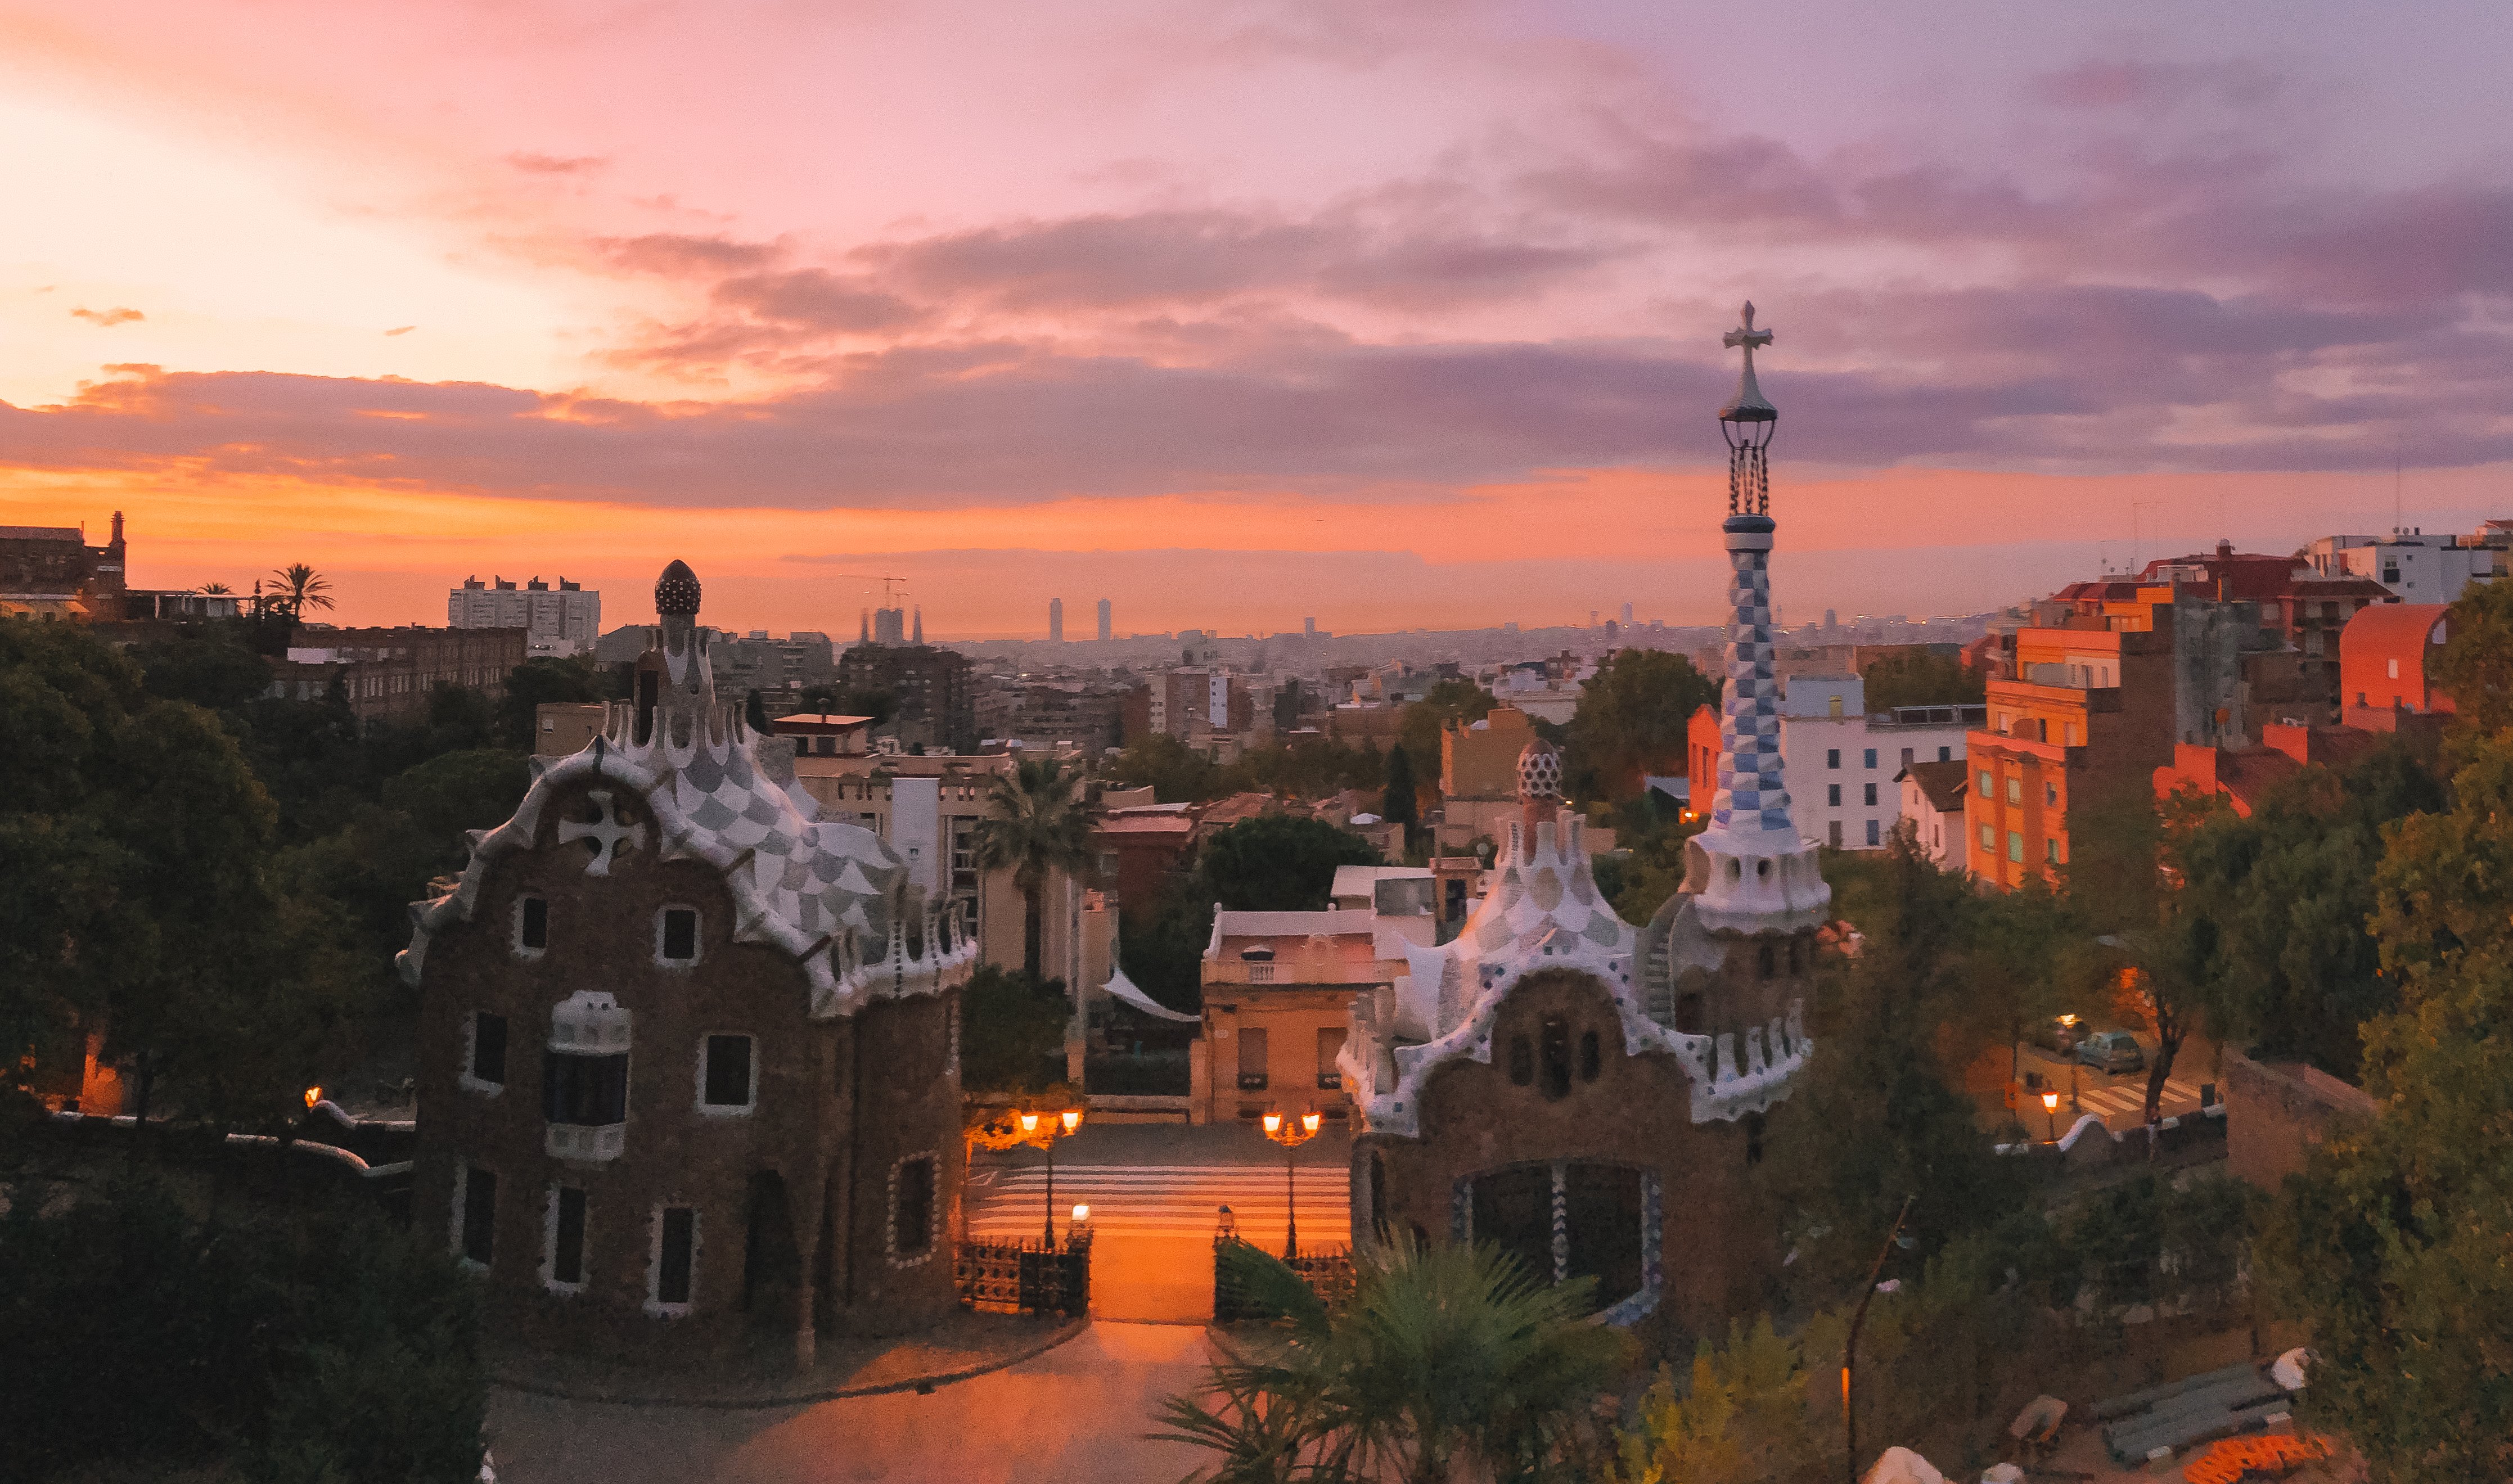 Red and pink sunrise at Park Guell